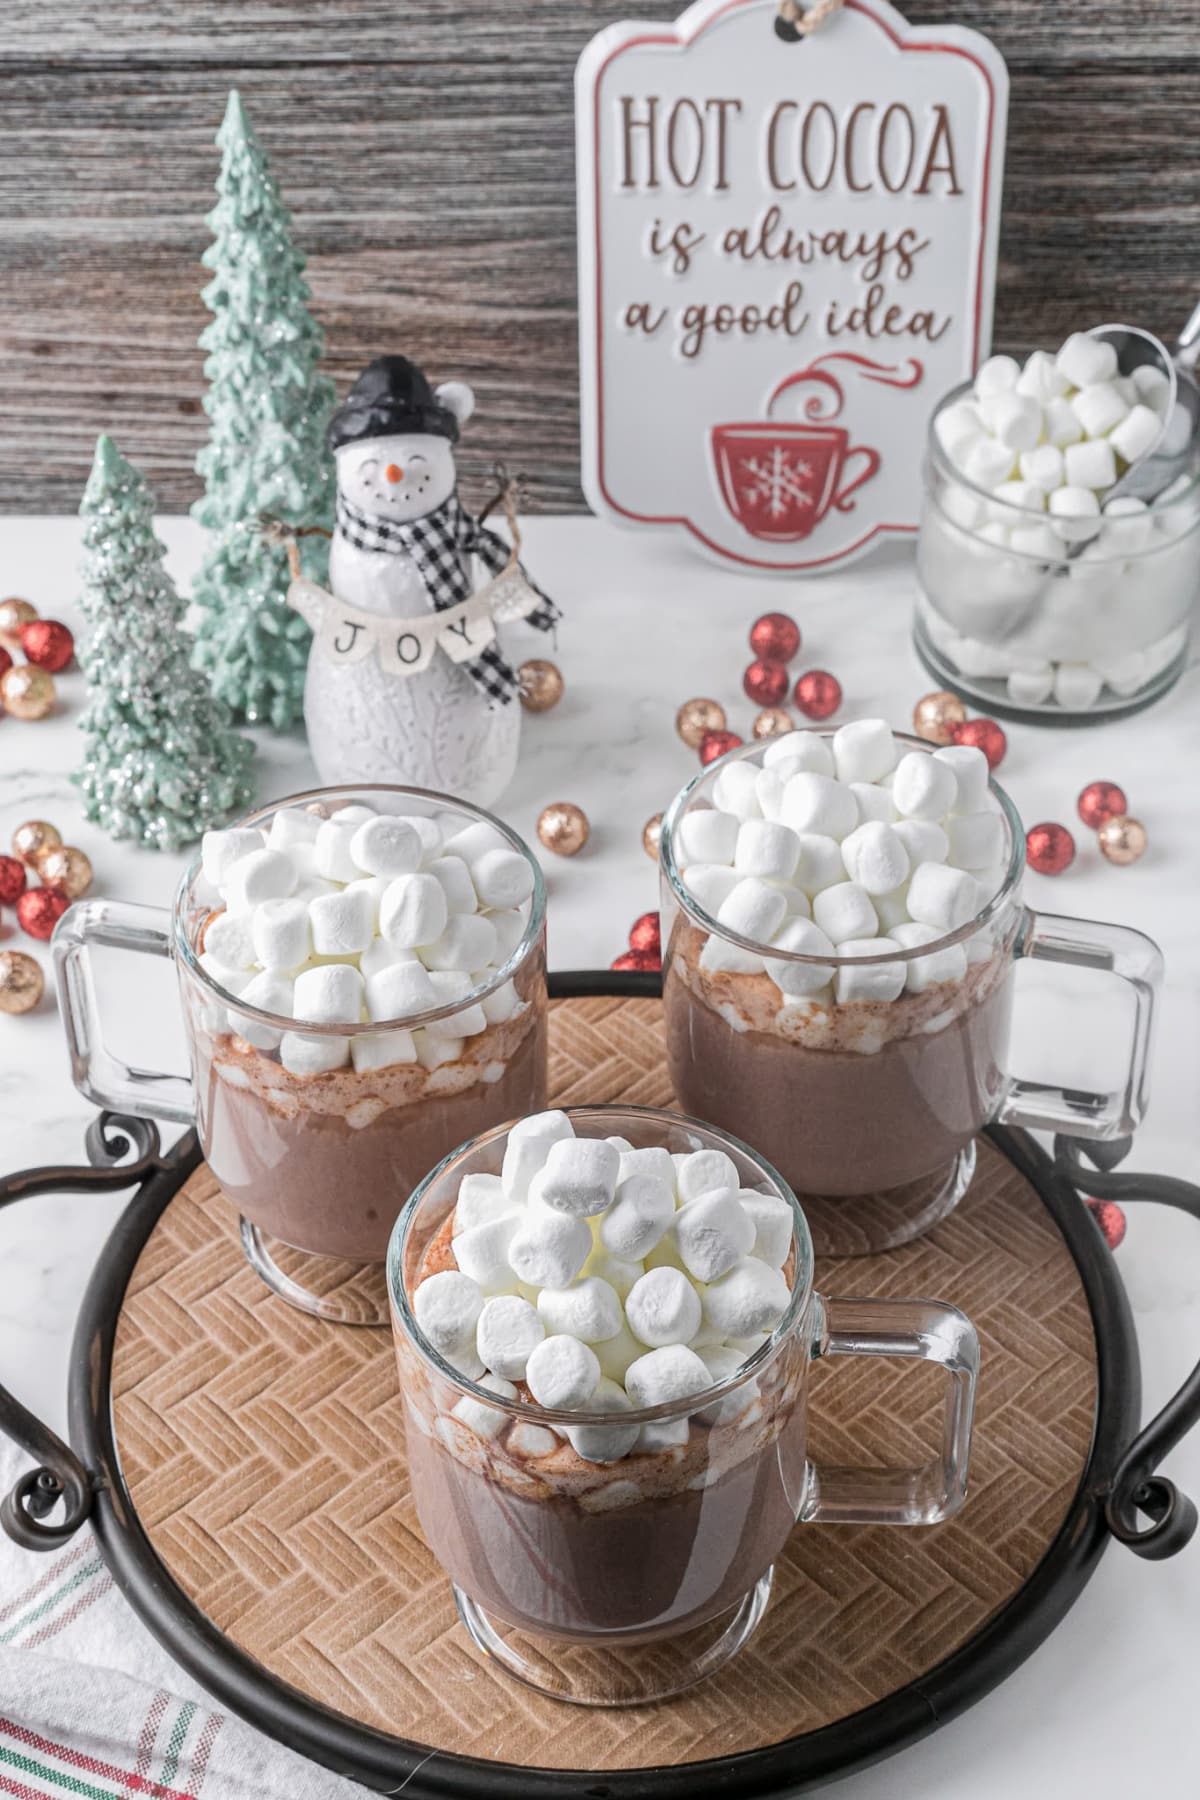 Three clear glass mugs of hot chocolate sitting on a table topped with marshmallows among holiday decorations